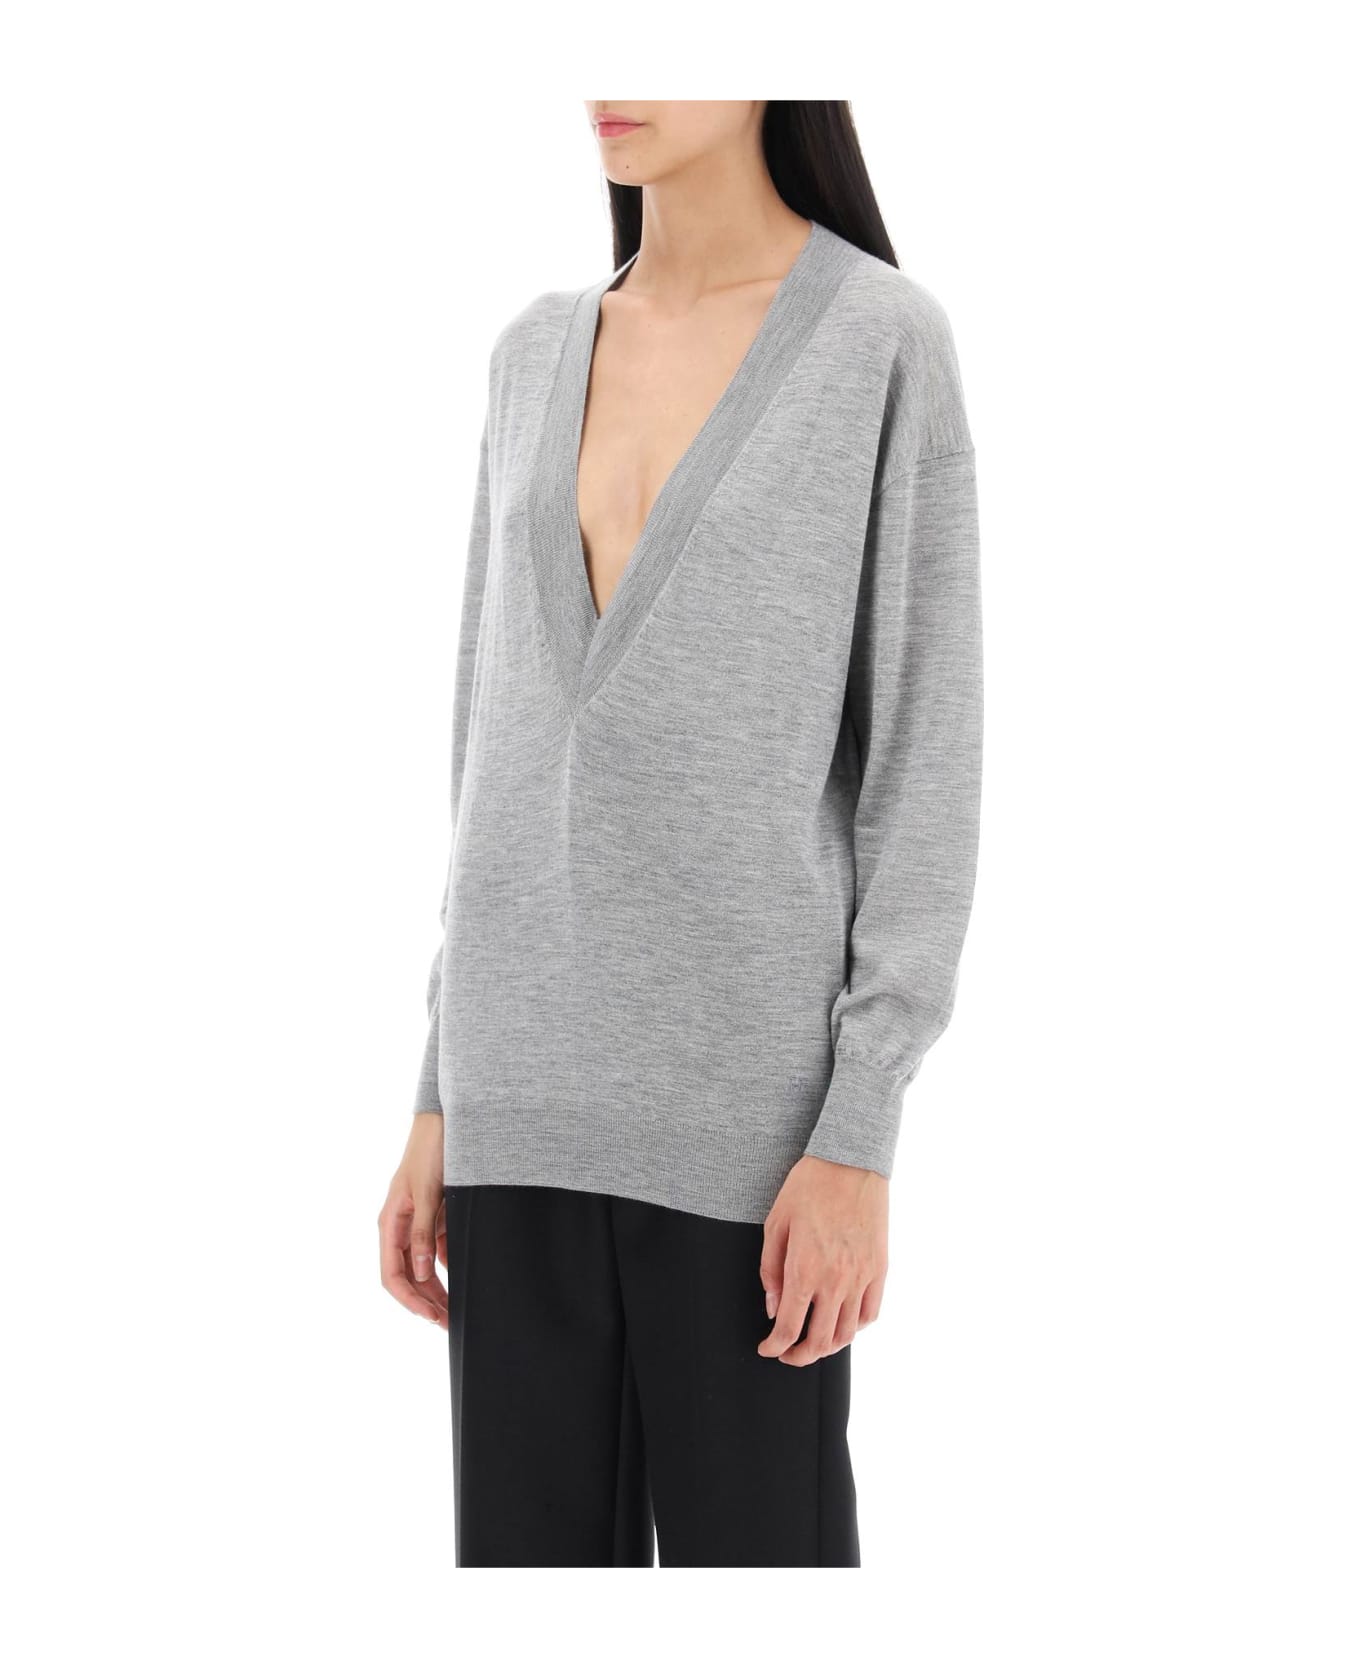 Tom Ford Sweater In Cashmere And Silk - GREY MELANGE (Grey)